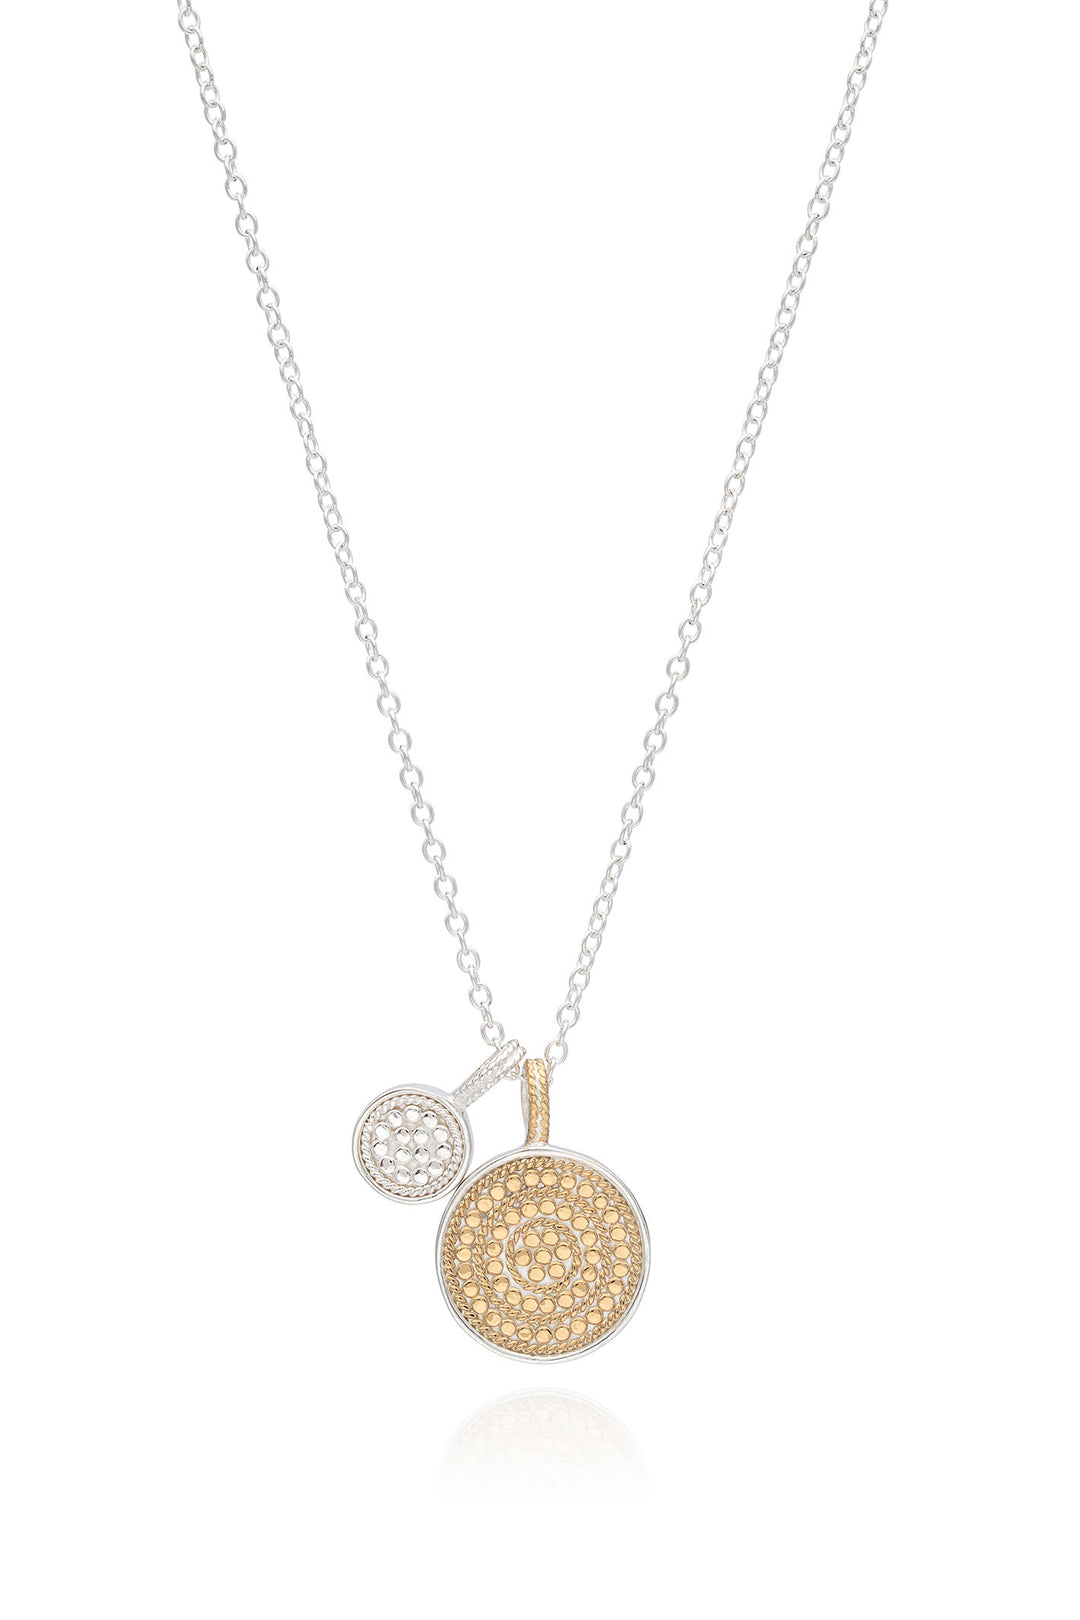 Anna Beck 0698N-TWT Dual Disc Charity Necklace